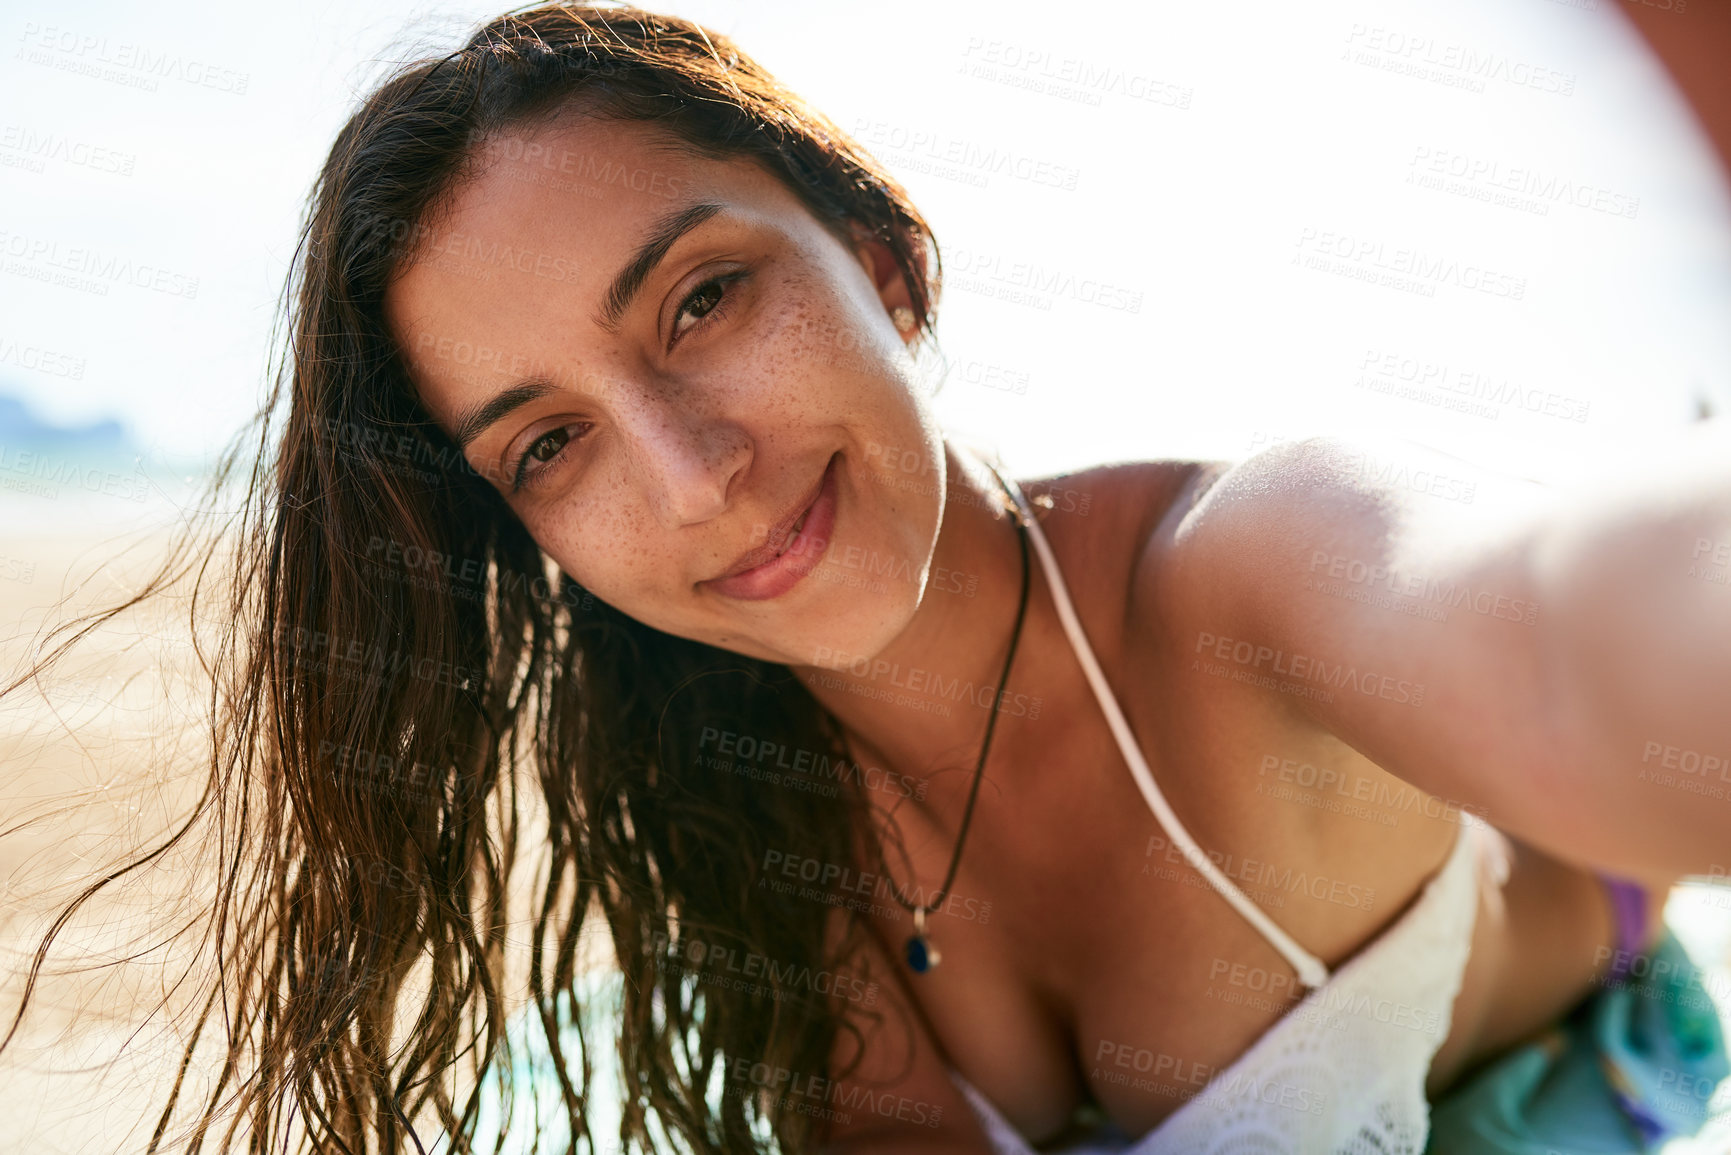 Buy stock photo Shot of a young woman taking a selfie while lying on the beach